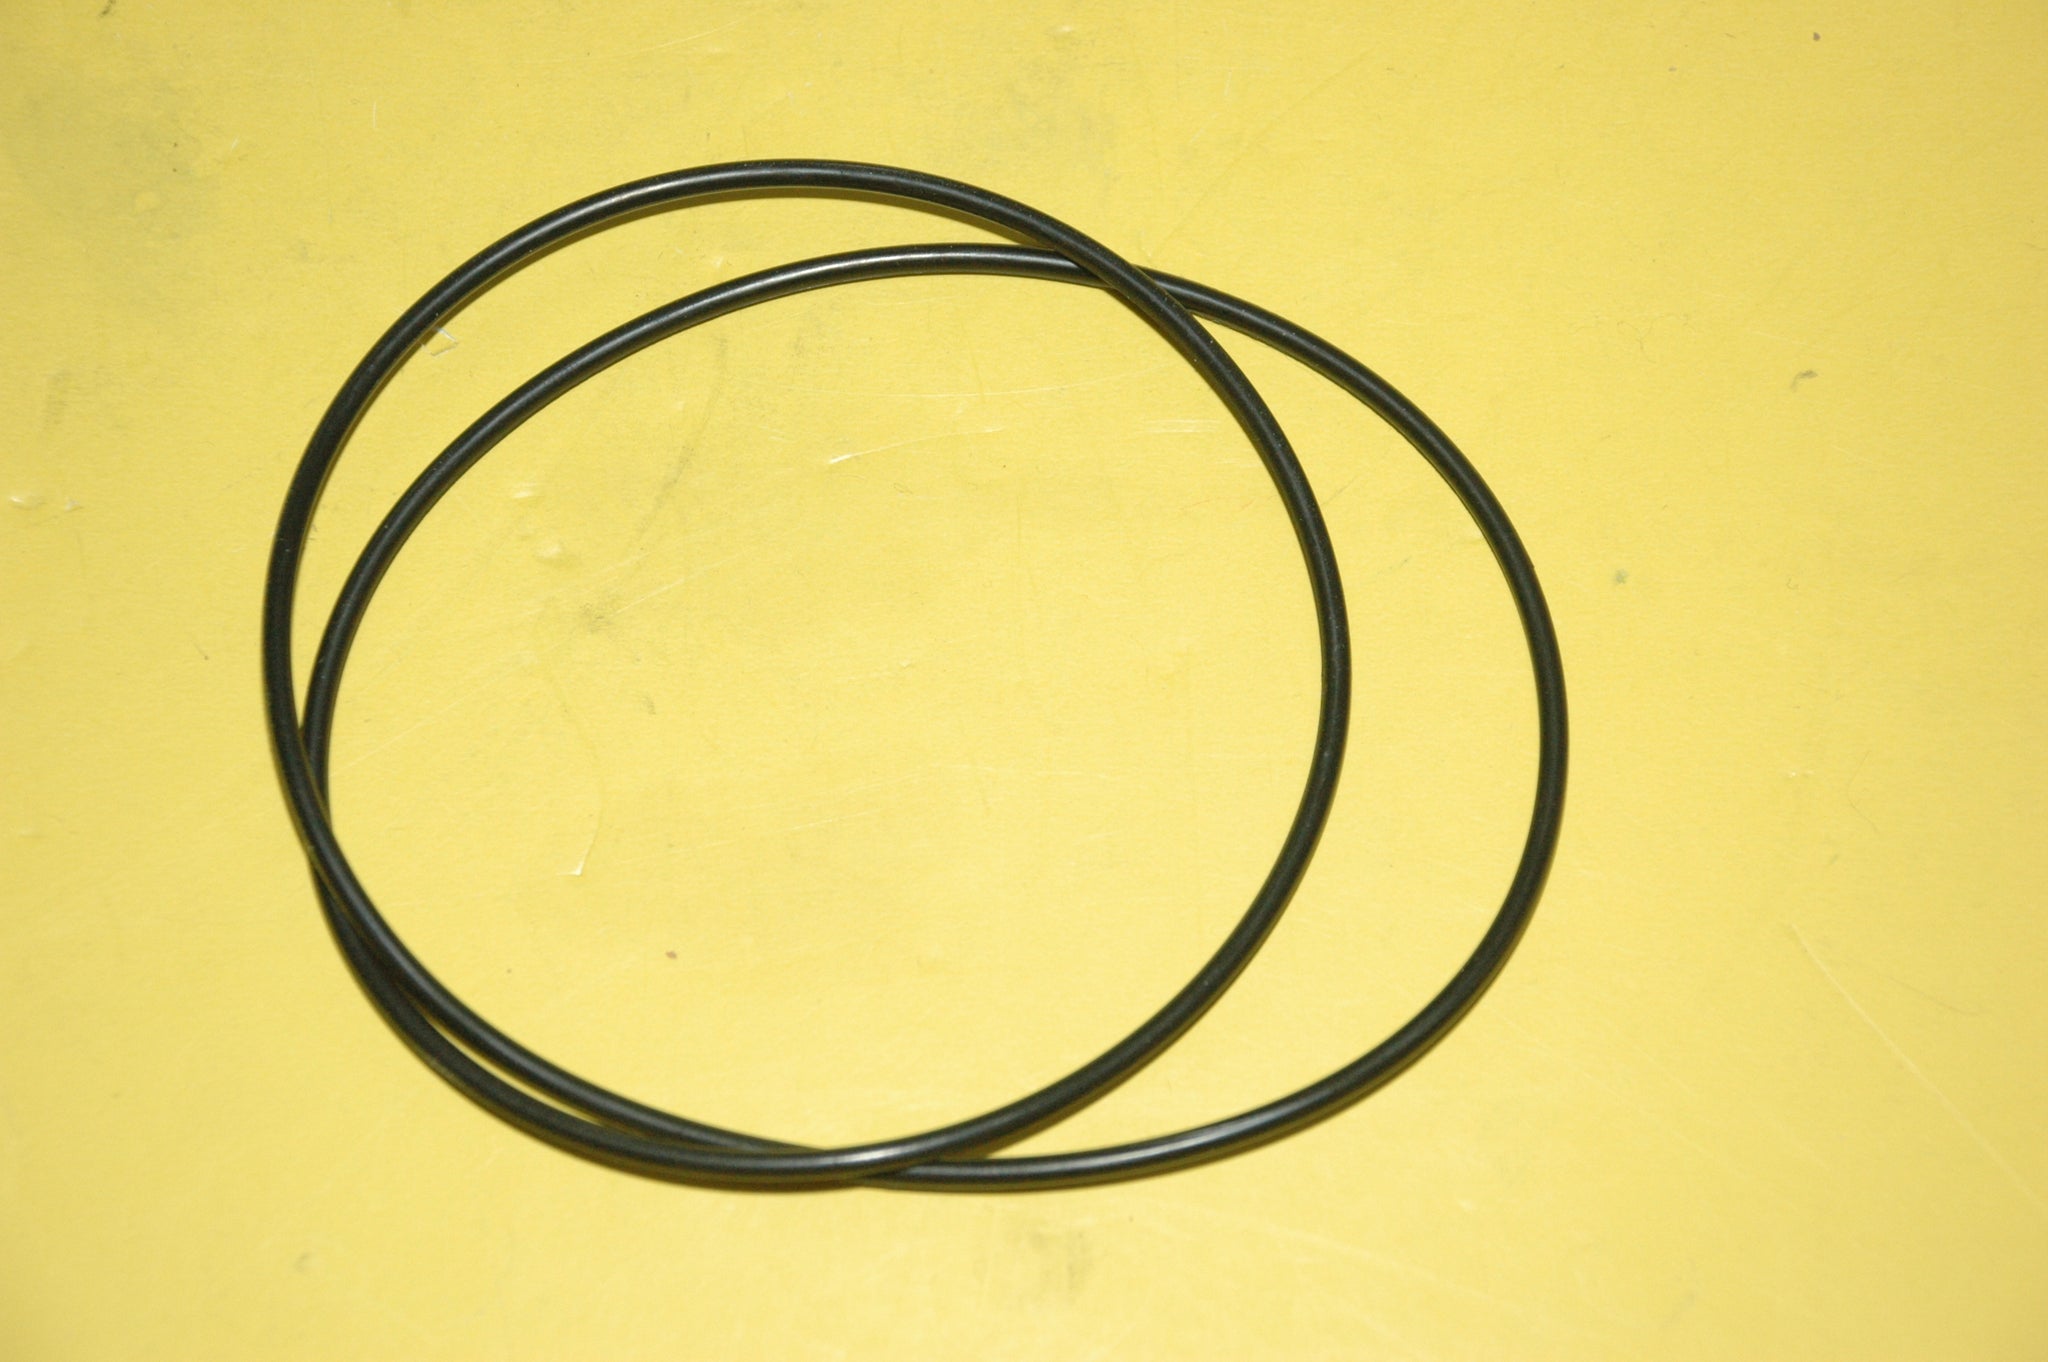 Honda VF700, 750 & 1000 Oil Pan O-Ring 11315-MB0-010 NEW REPLACEMENT Non-OEM  Qty 1